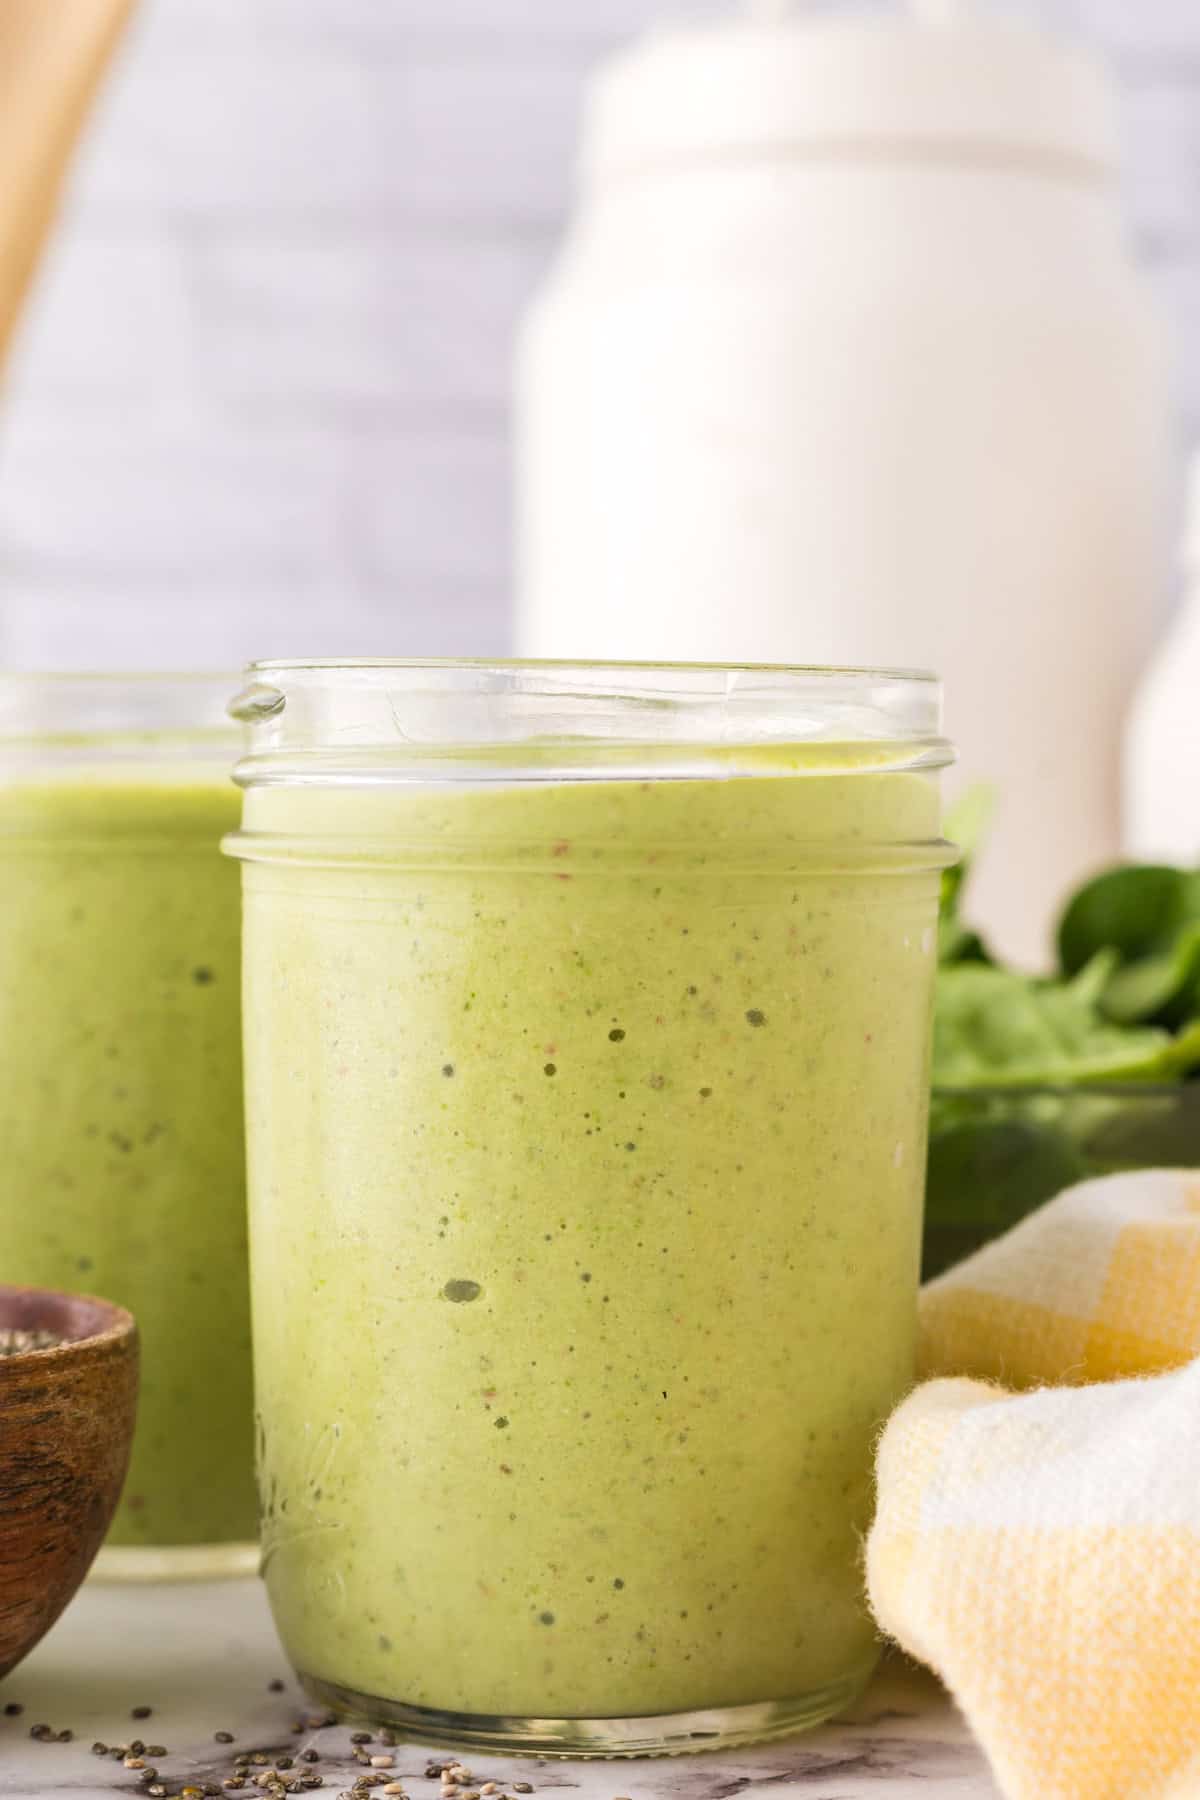 Glass filled with a green smoothie.